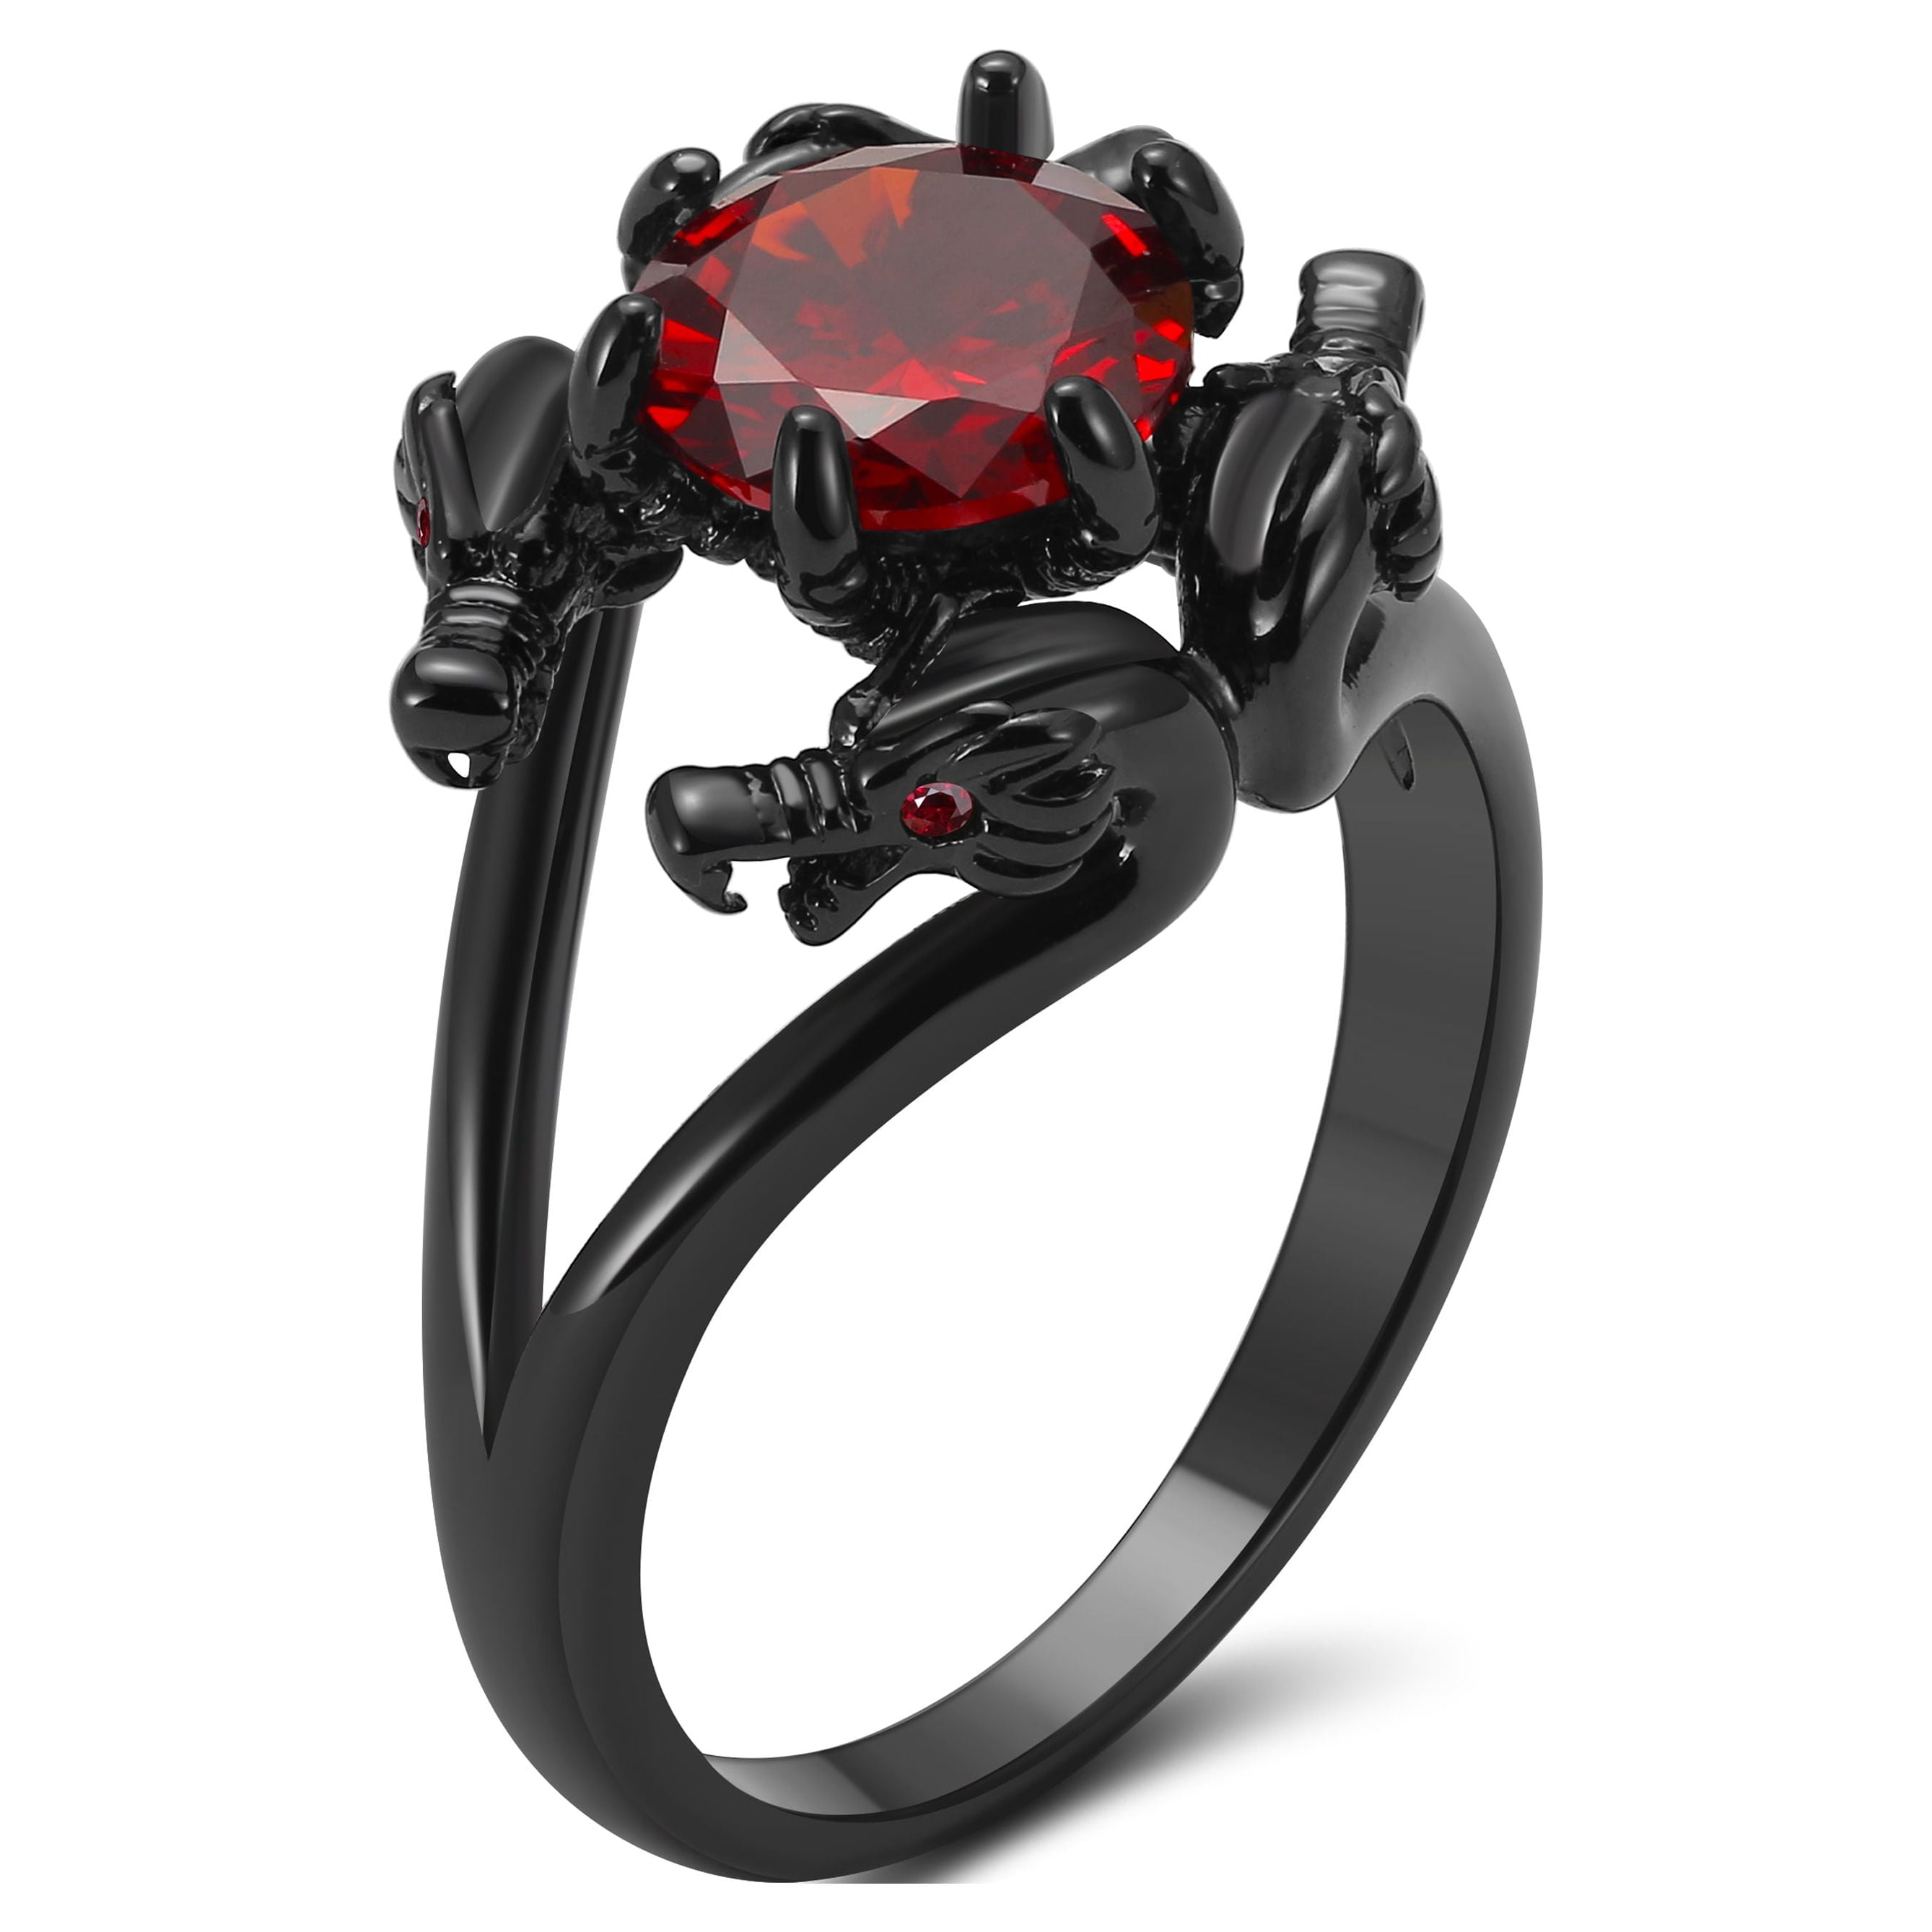 Shop wedding ring black for Sale on Shopee Philippines-vachngandaiphat.com.vn